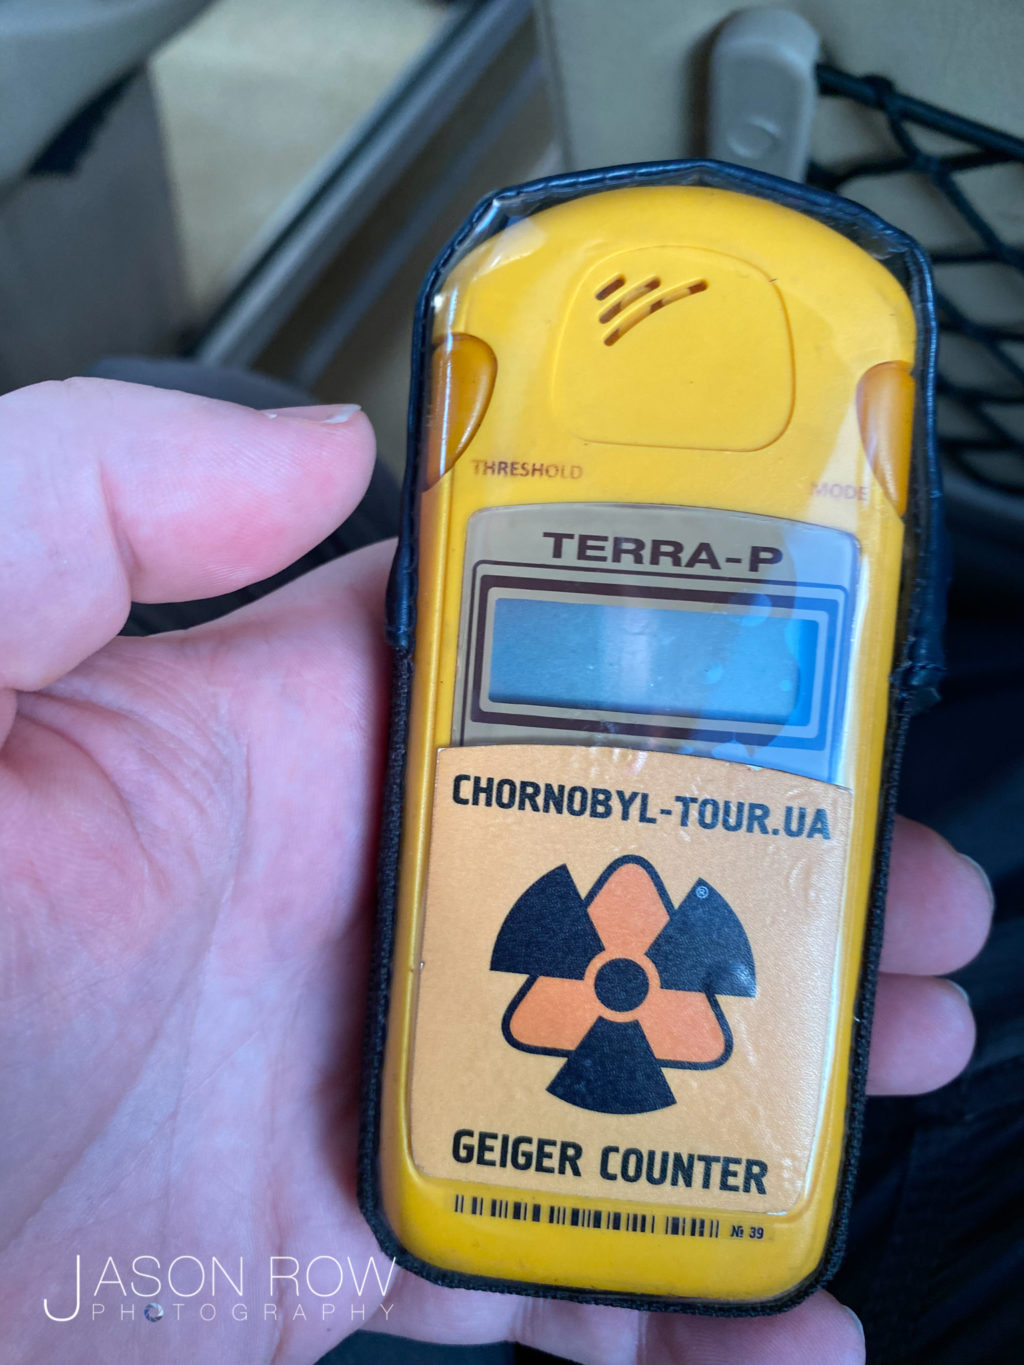 Geiger counter in Chernobyl 